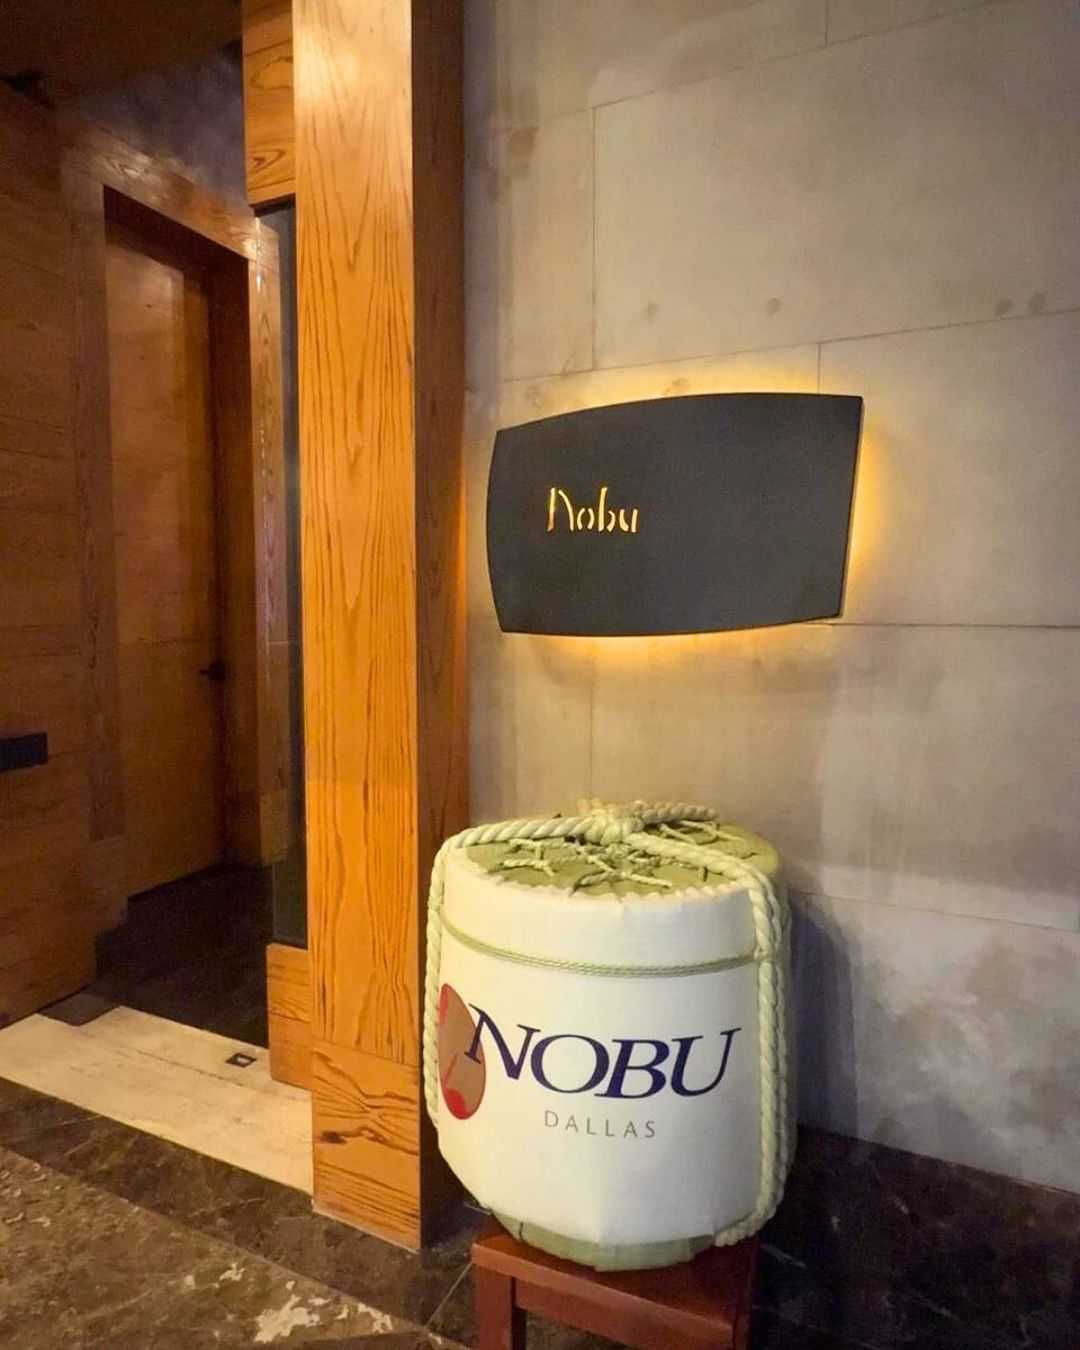 At The Crescent, we’re proud to offer Nobu, an iconic sushi destination celebrated worldwide.⁠
⁠
Share your sushi love with a 🍣 if you’ve been here!⁠
⁠
.⁠
.⁠
.⁠
#thecrescent #uptowndallas #nobudallas #bestsushiindallas #bestdallasrestaurants #nobu ⁠#ValentinesDayDinner #CrescentEats⁠
#NobuExperience⁠